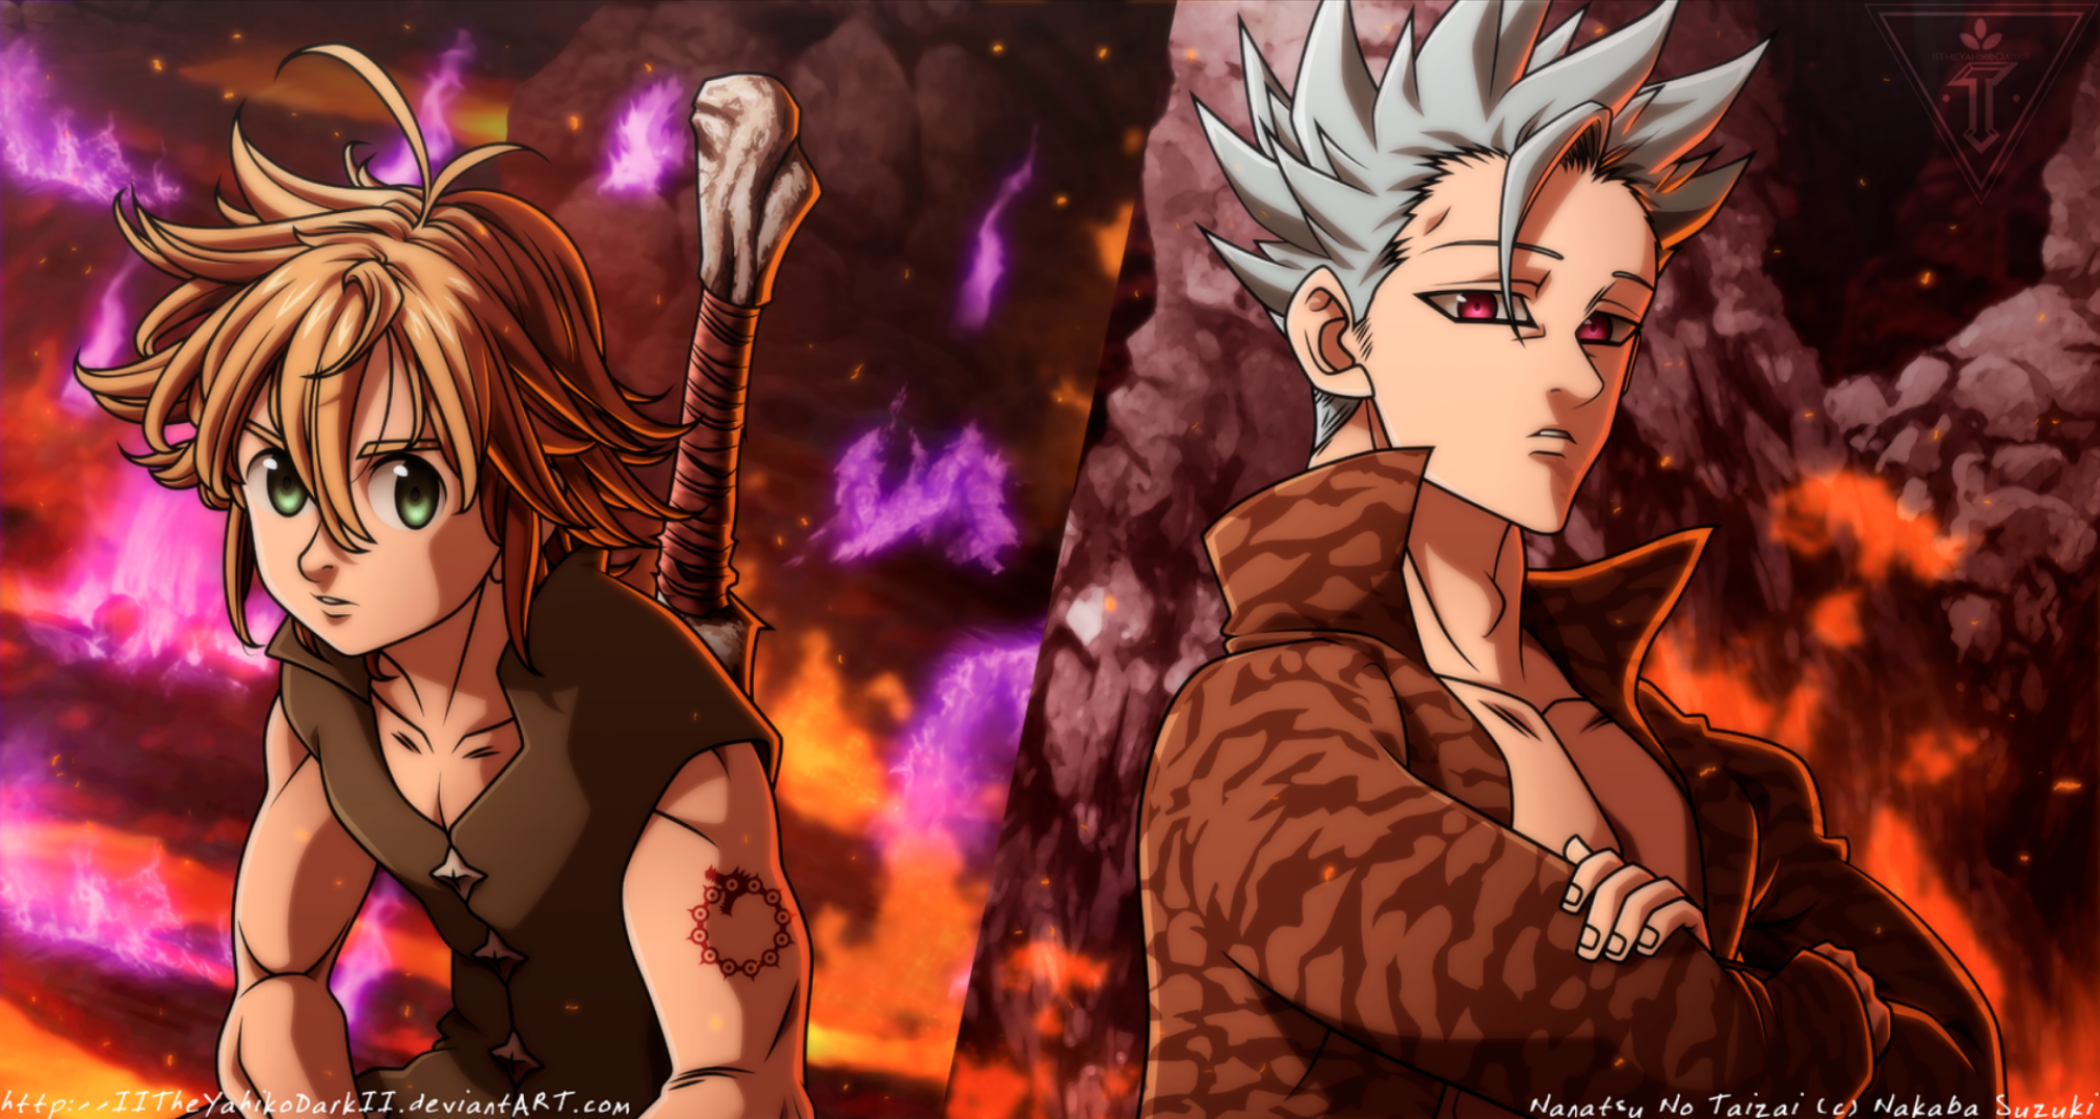 The Seven Deadly Sins HD Wallpaper. Background Imagex1119